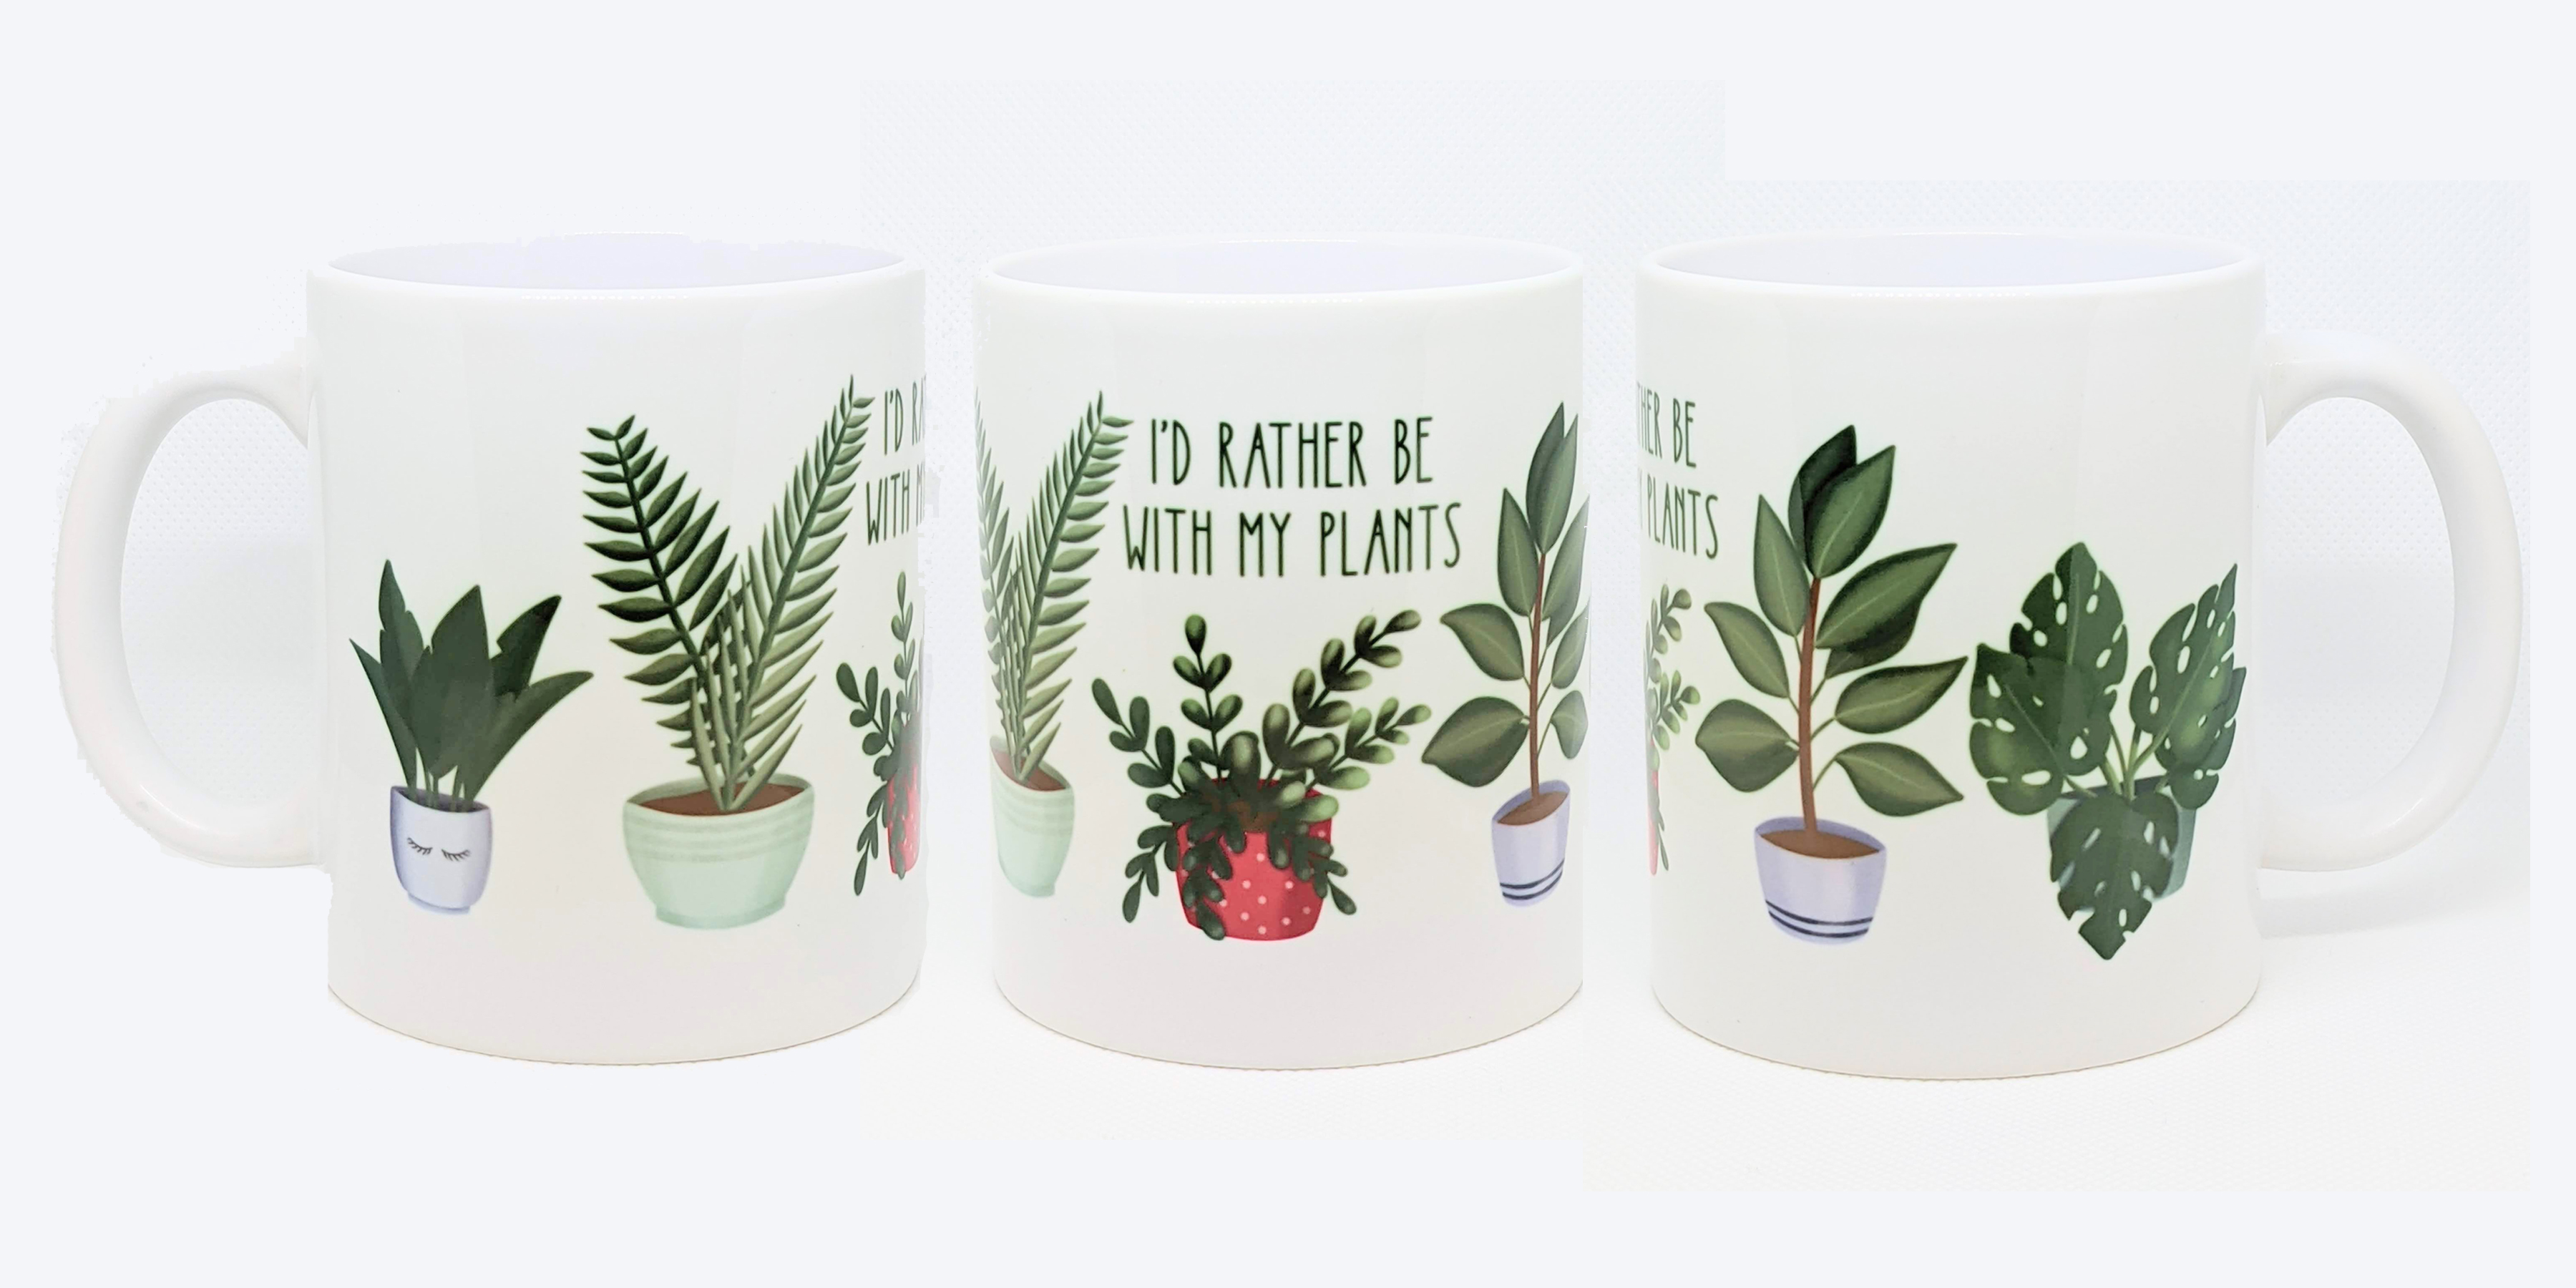 I'd Rather Be with My Plants mug